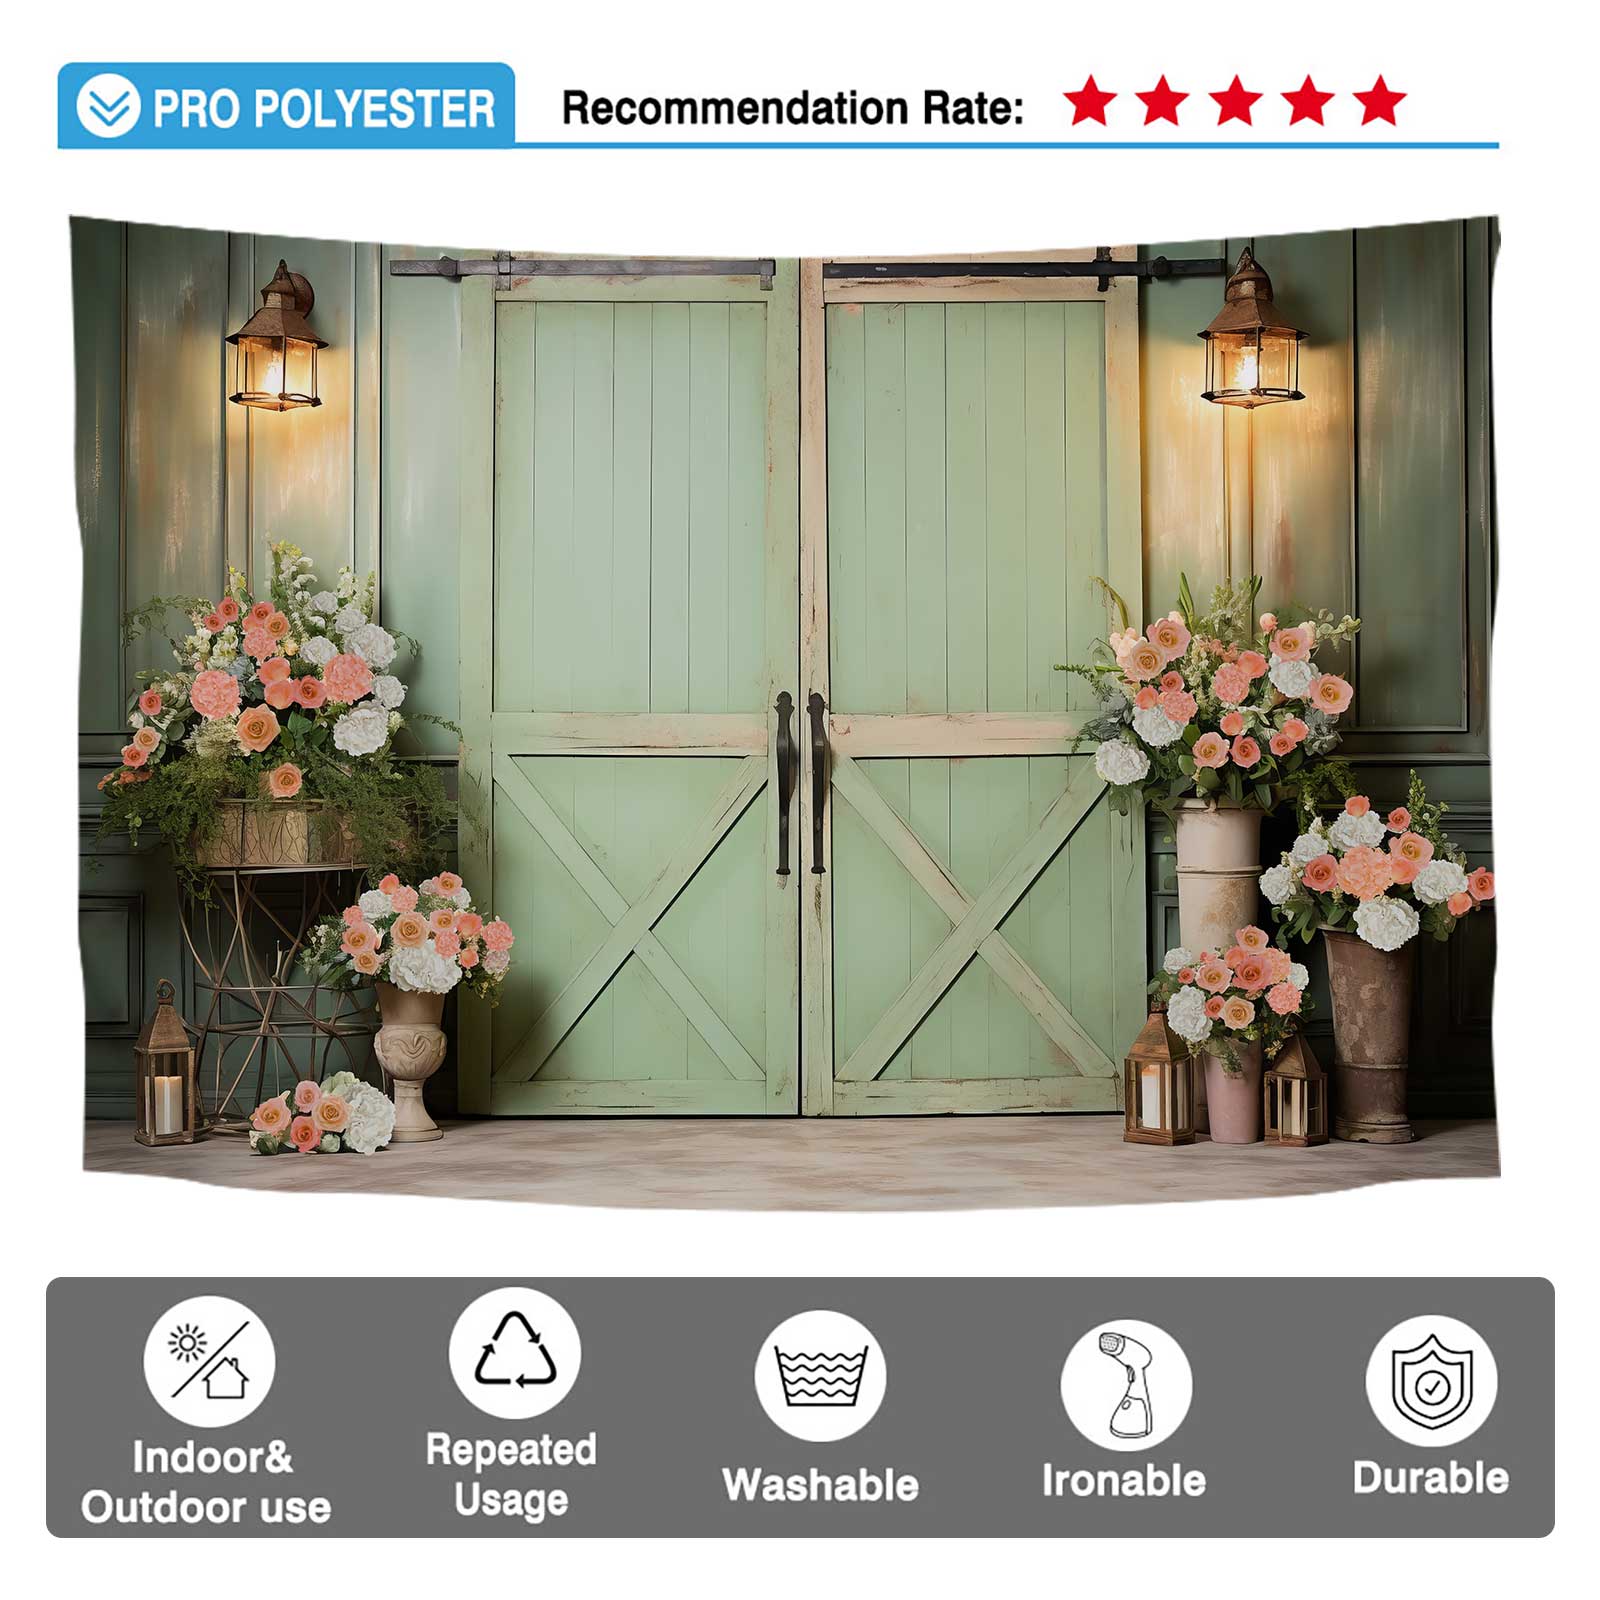 Allenjoy Spring Floral Green Barn Door Photography Backdrop Antique Flowers Vases Setup Rustic Decorations Photoshoot Background